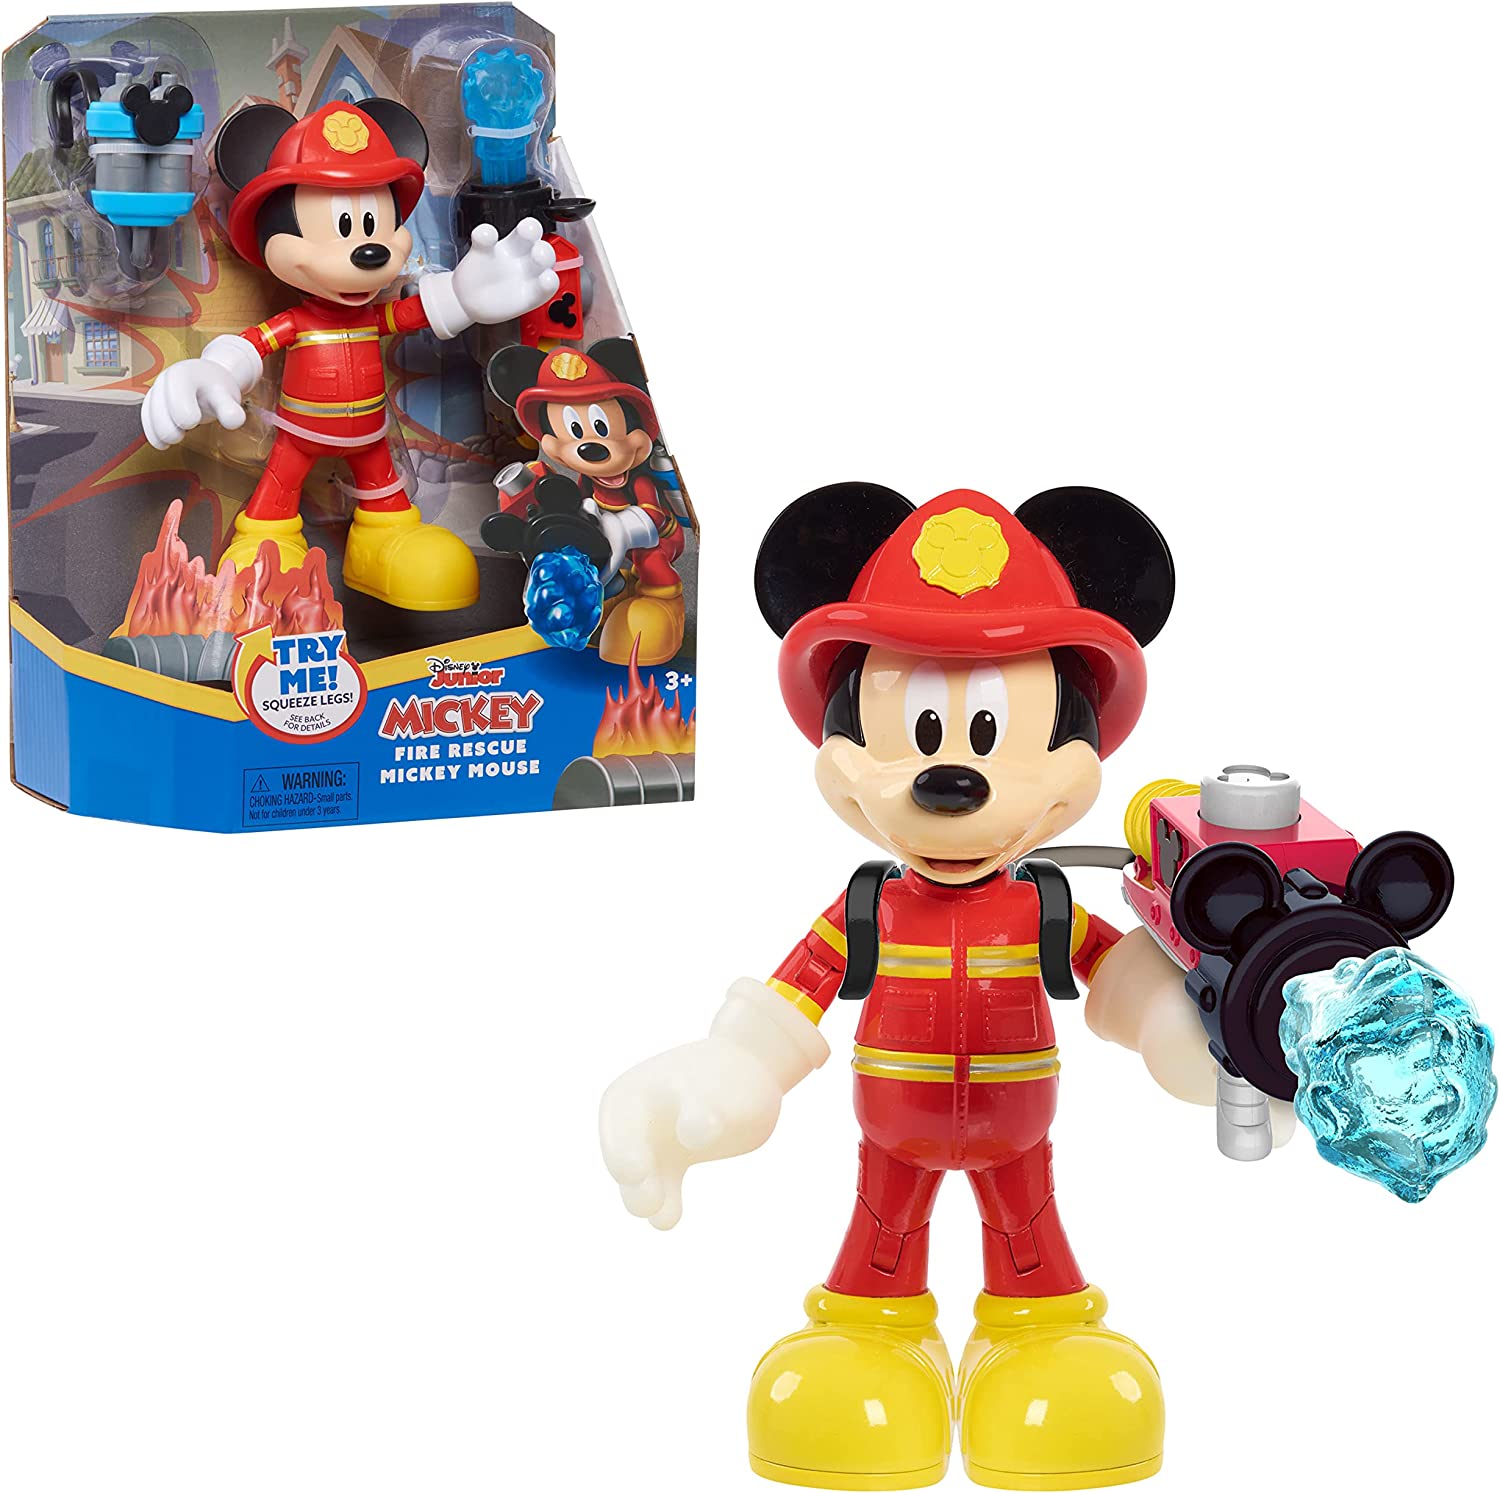 Mickey Mouse Firefighter Mickey